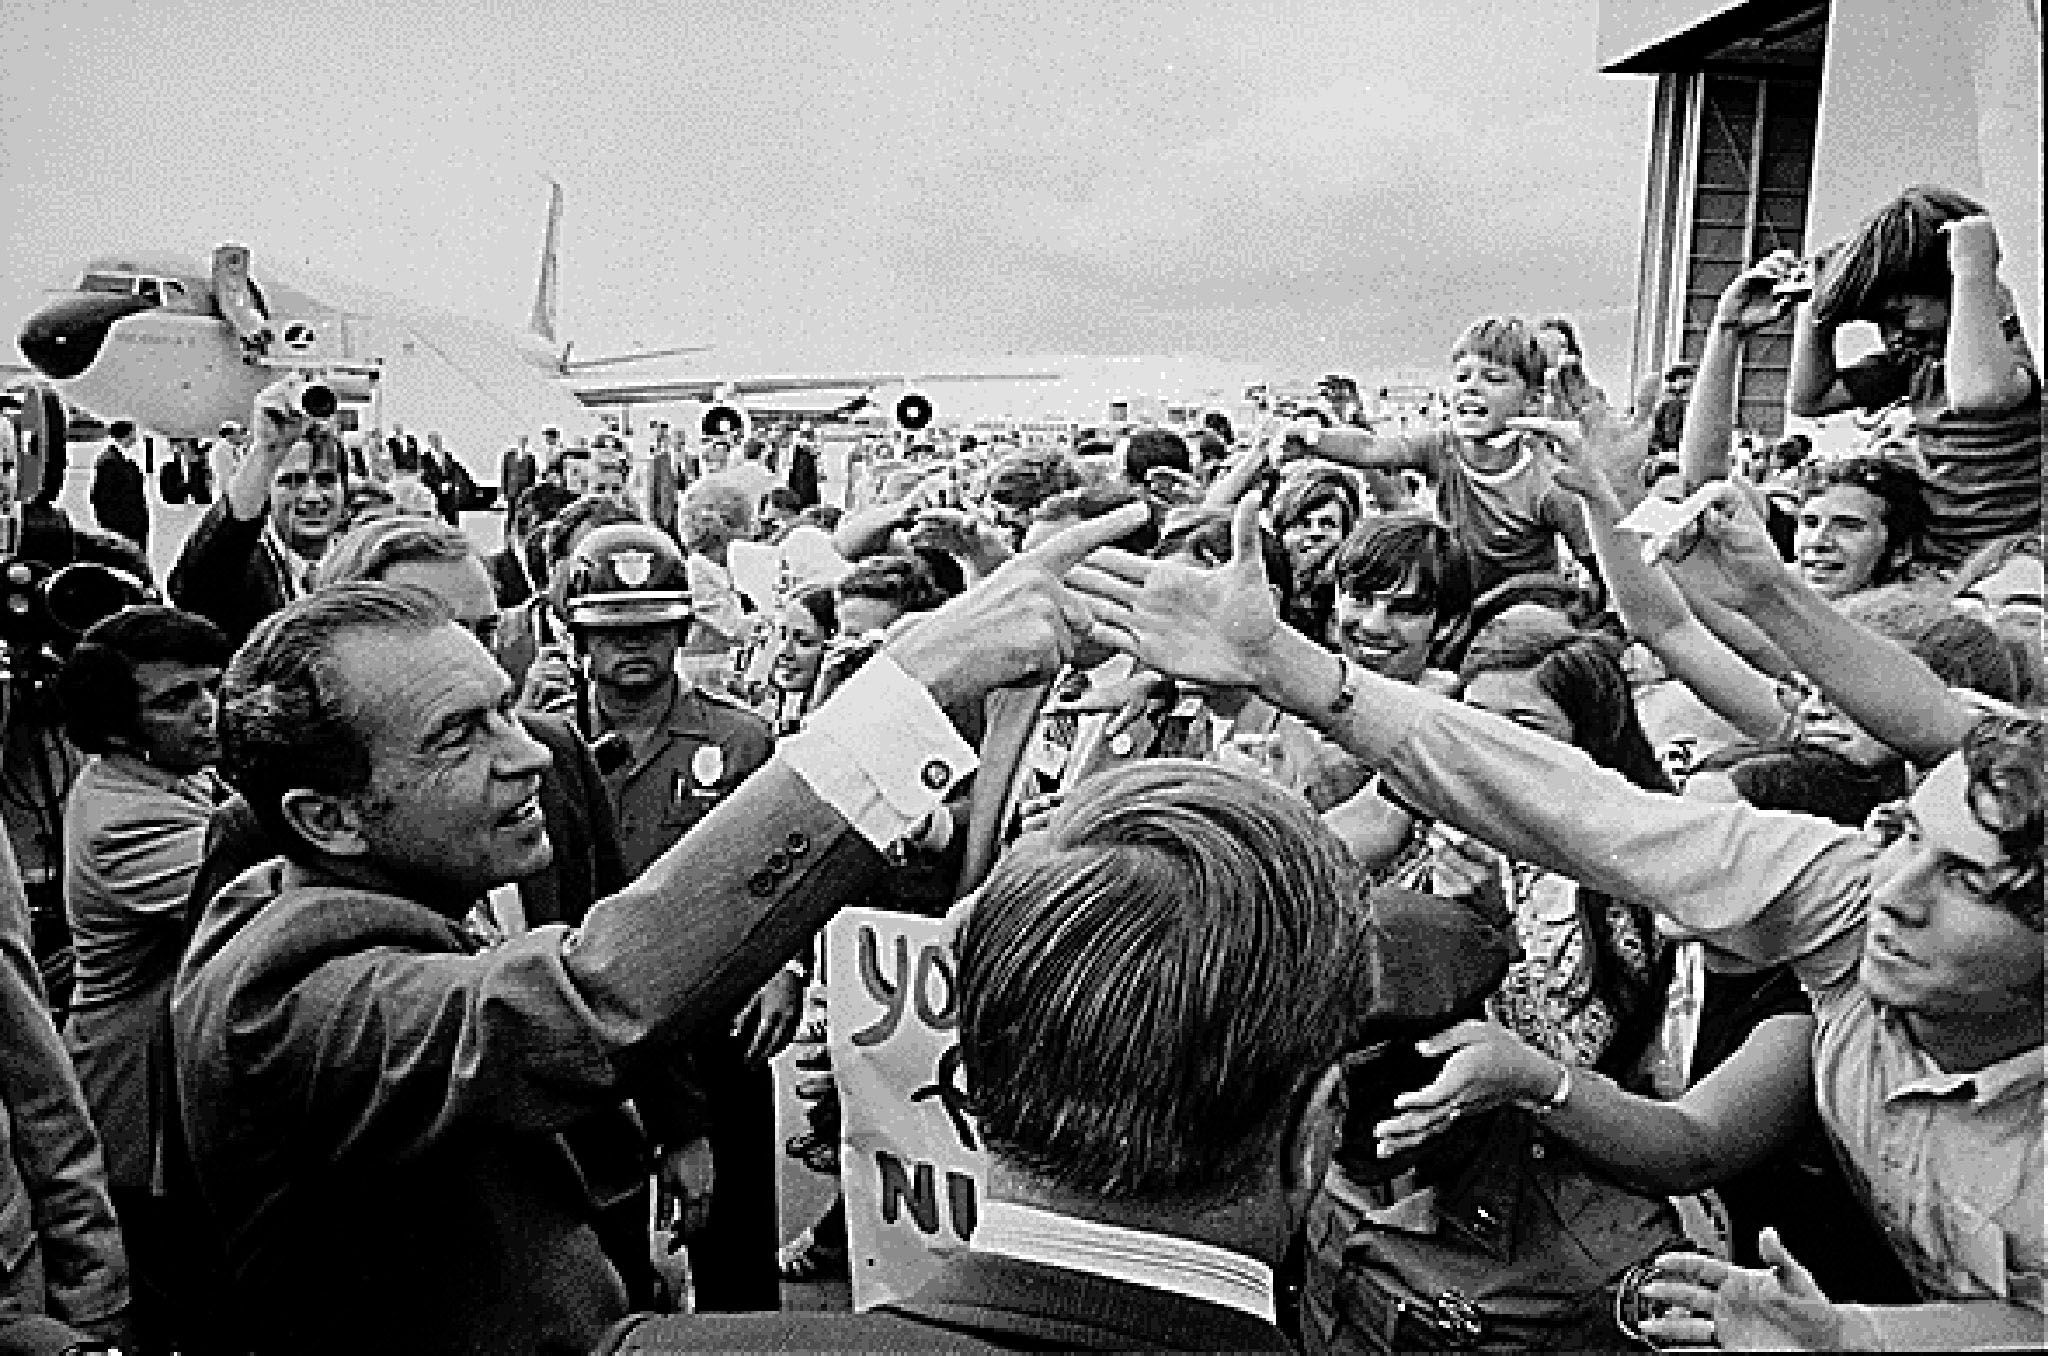 President Nixon greeting supporters on his way to the Republican National Convention in 1972.  He resigned two years later